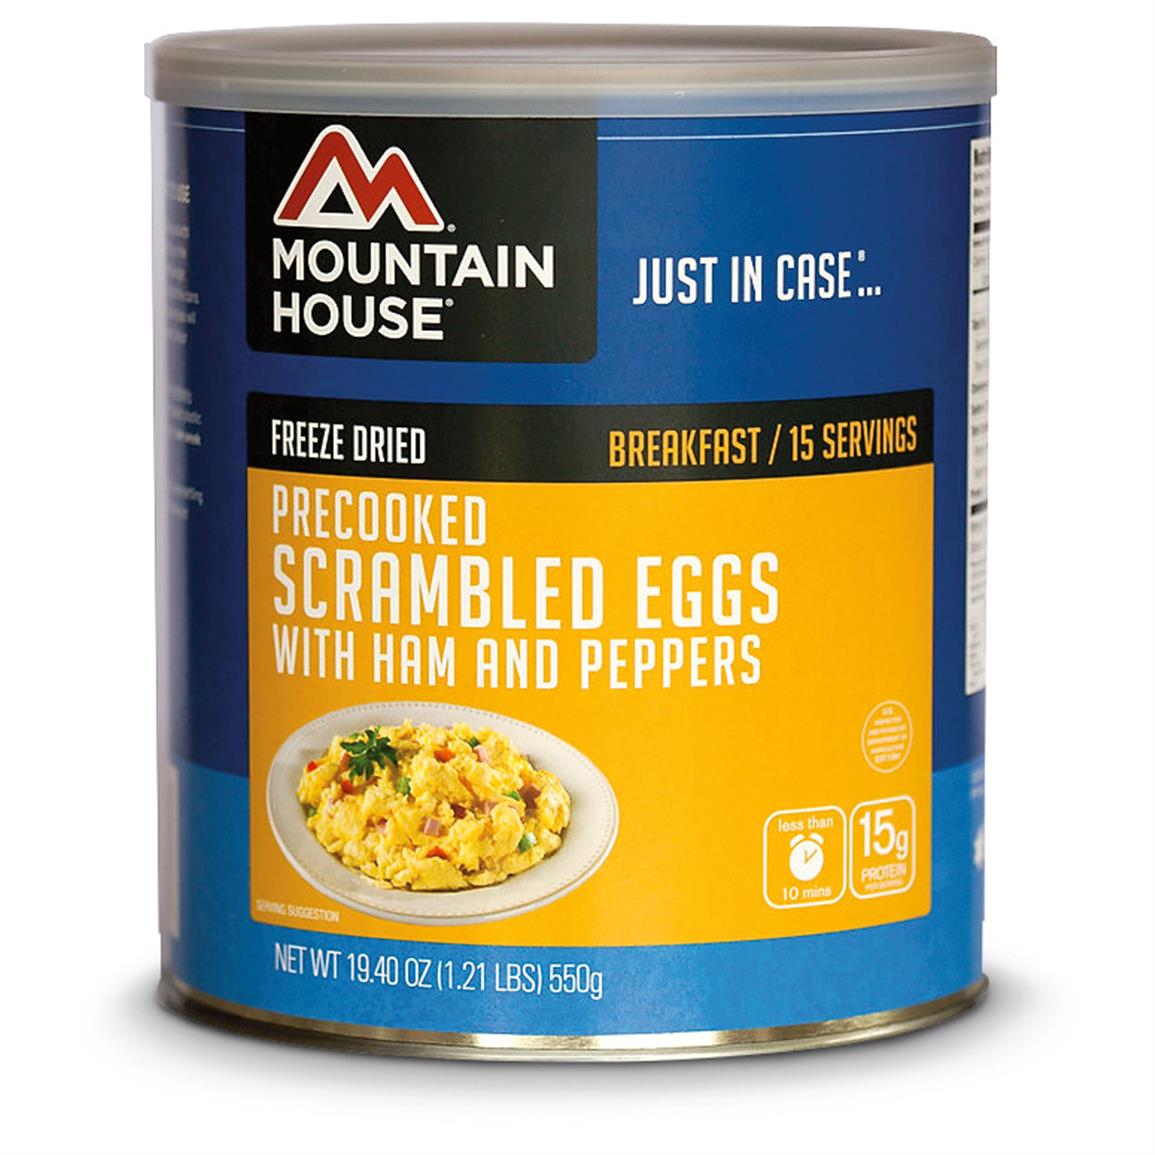 Mountain House Emergency Food Freeze-Dried Scrambled Eggs, Ham and Peppers, 17 Servings